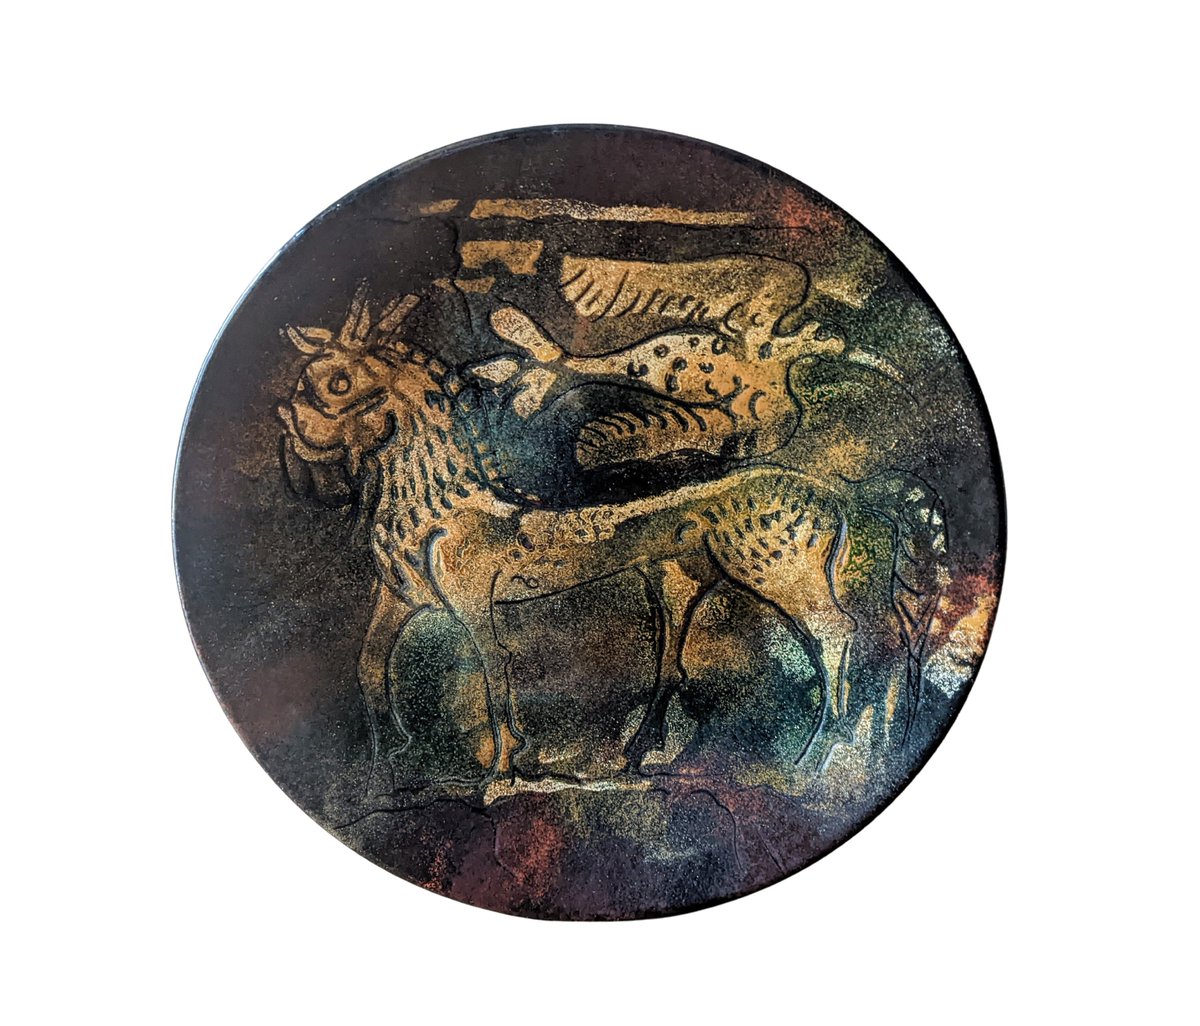 Love this very cool metal and enamel wall hanging / plate!  I think this might be the Beast of Gevaudan.  An interesting and horrifying story of a beast that terrorized a small French town in the 18th century.  The plate of course is from the 20th century and now avail